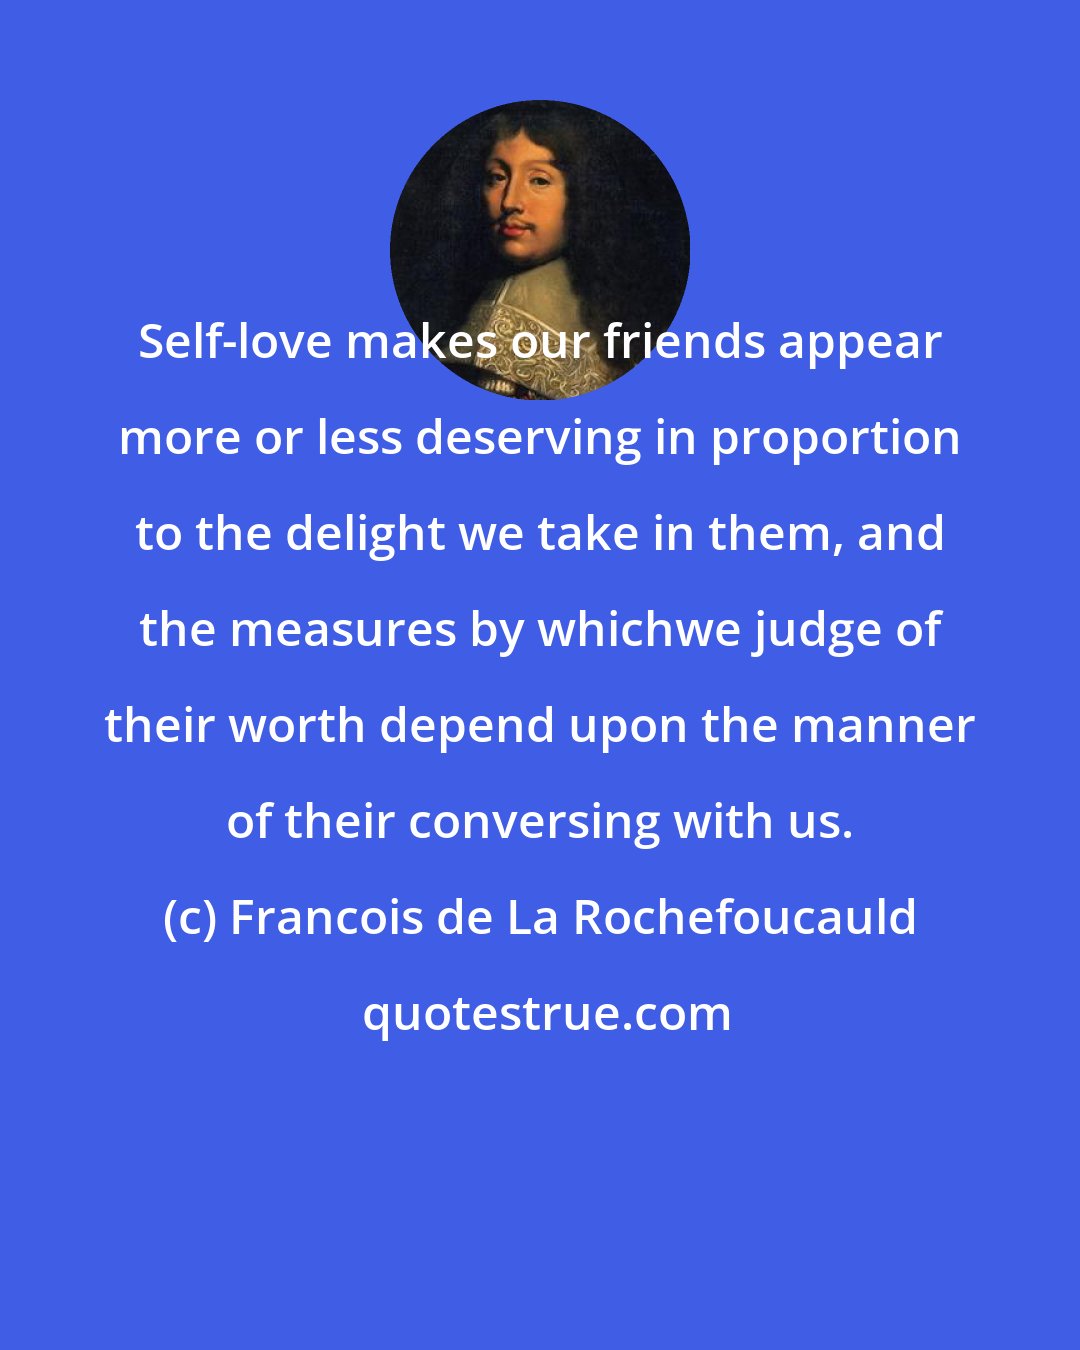 Francois de La Rochefoucauld: Self-love makes our friends appear more or less deserving in proportion to the delight we take in them, and the measures by whichwe judge of their worth depend upon the manner of their conversing with us.